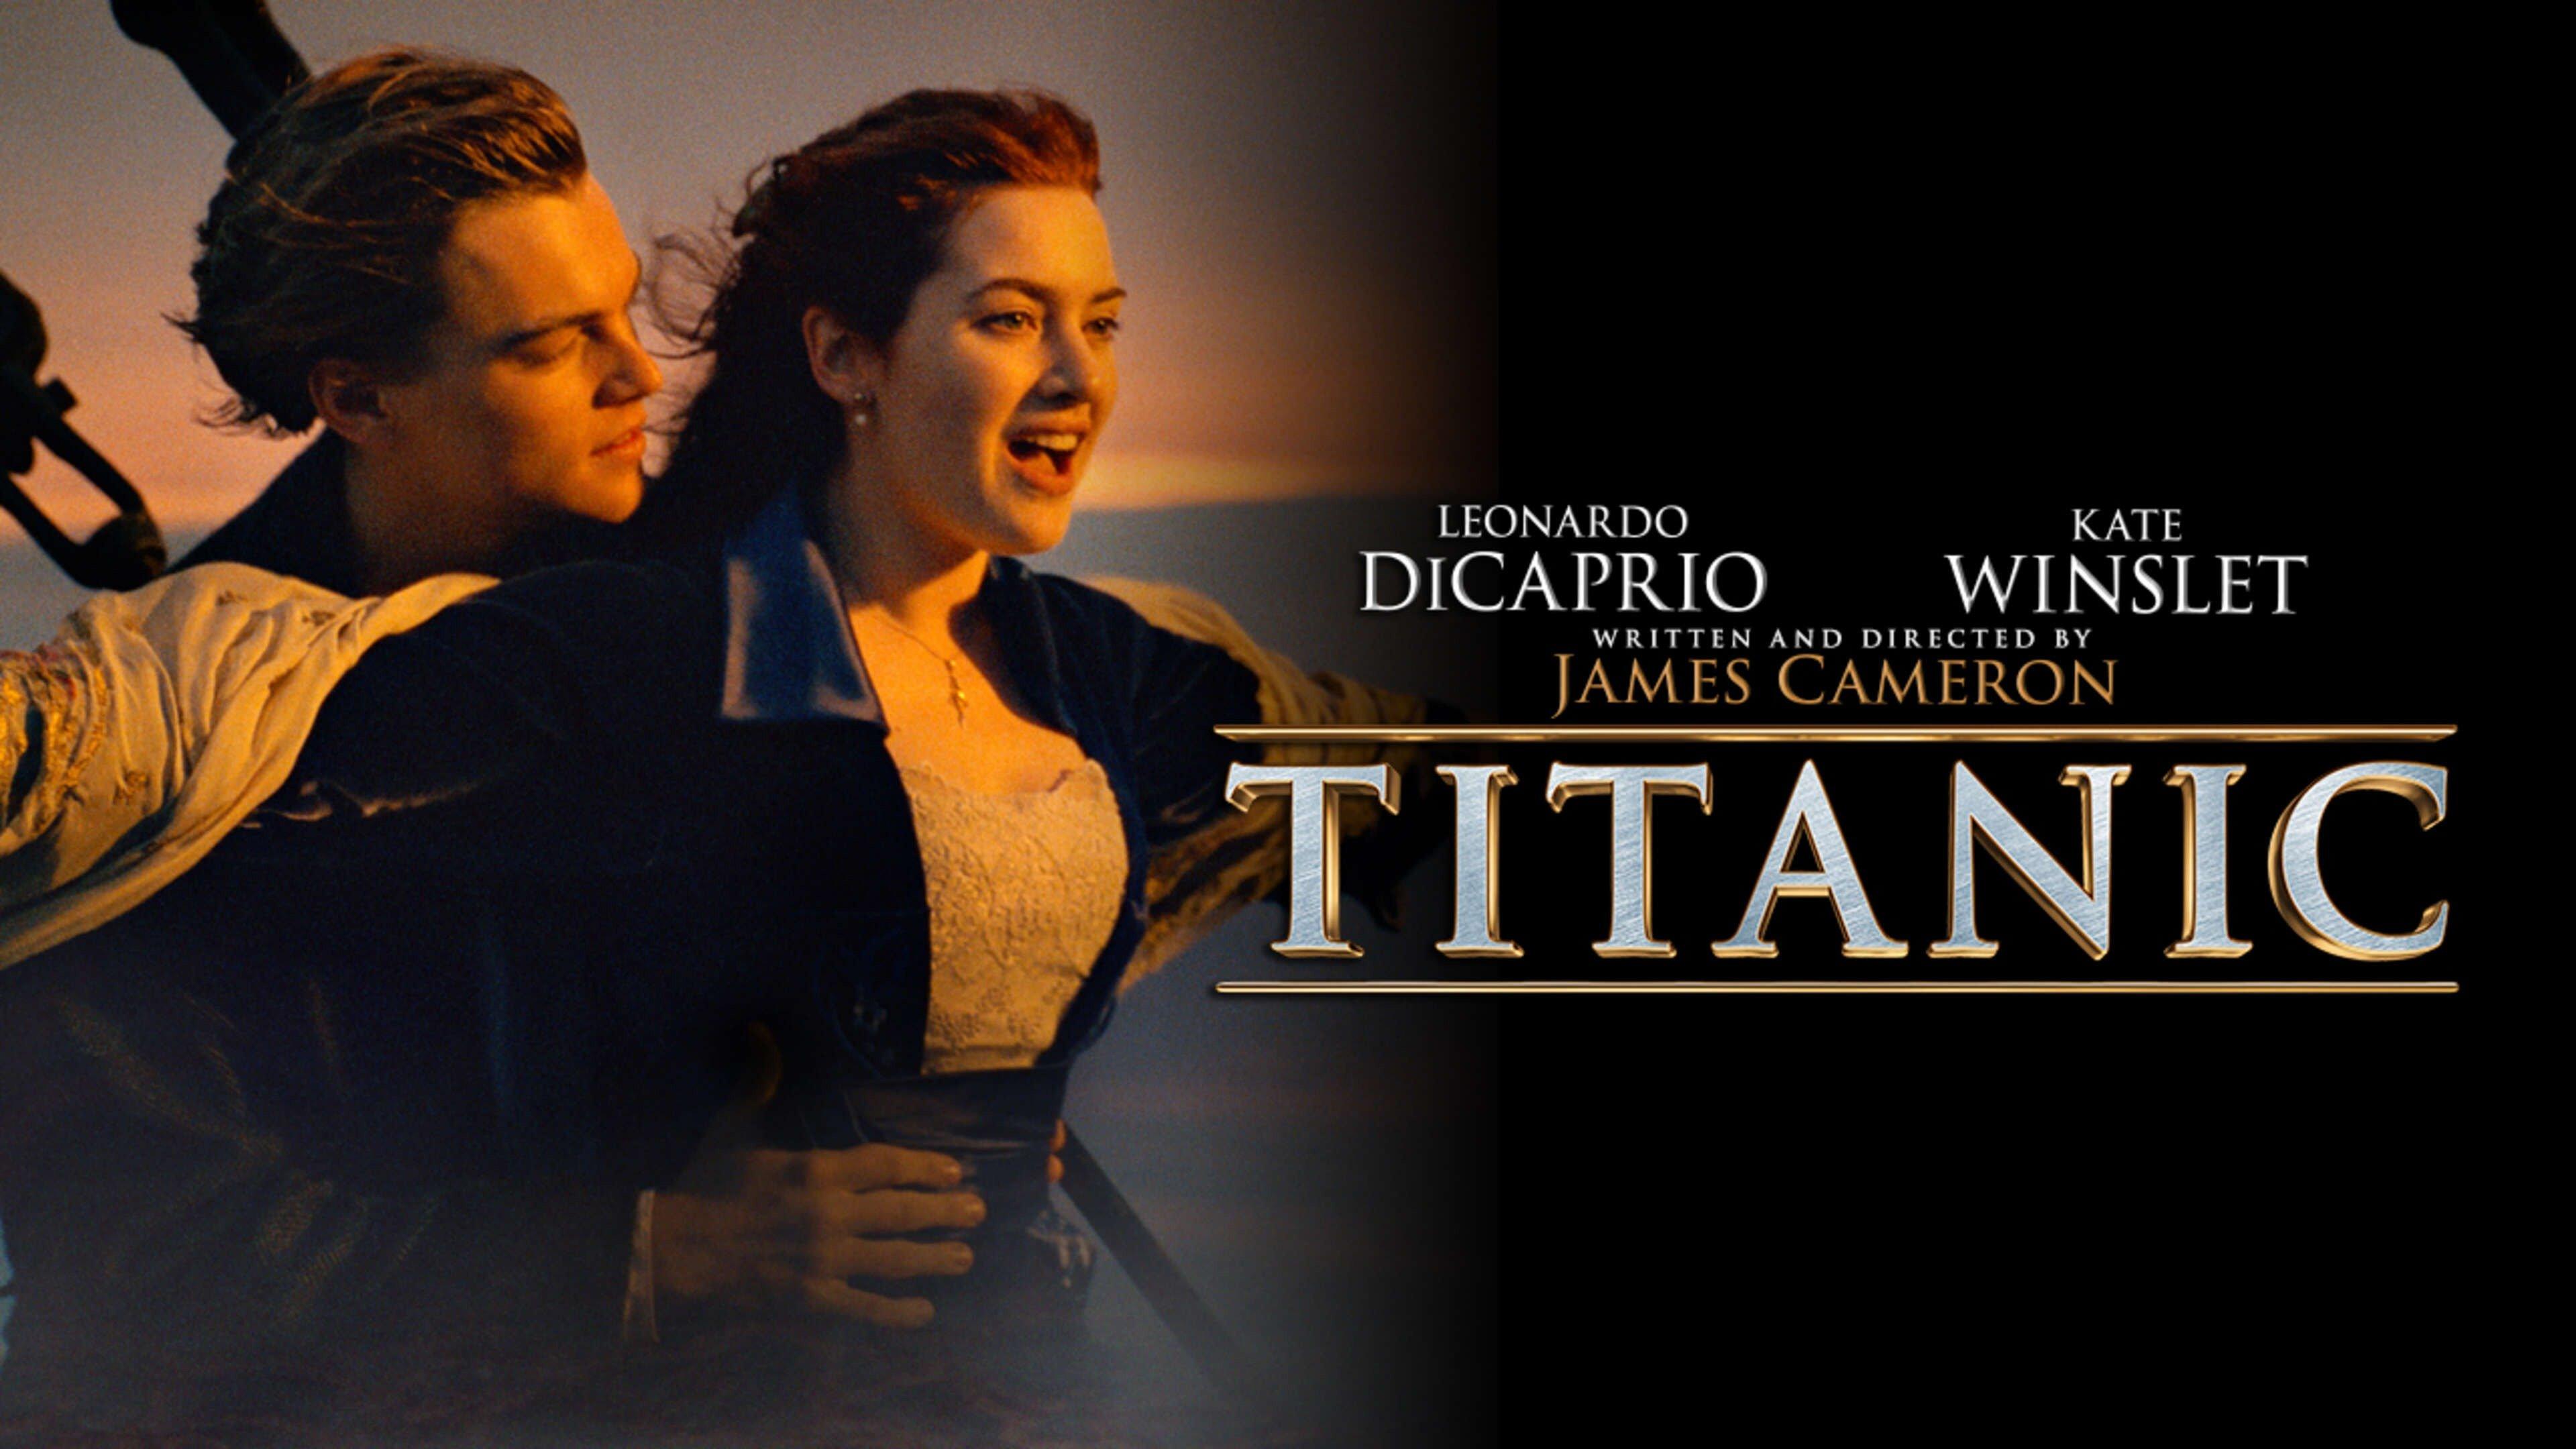 Watch Titanic Full Movie Streaming Online (Free Trial) | Philo